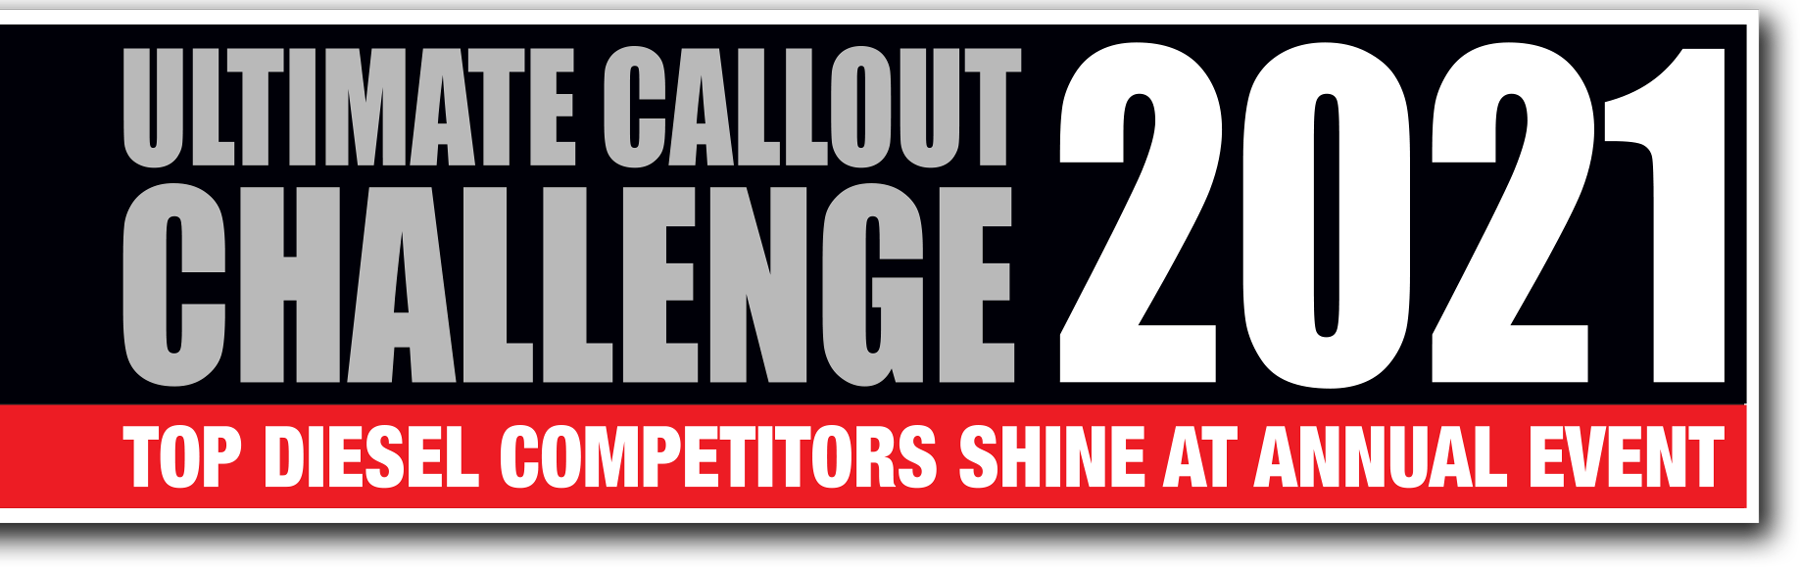 Ultimate Callout Challenge 2021: Top Diesel Competitors Shine at Annual Event